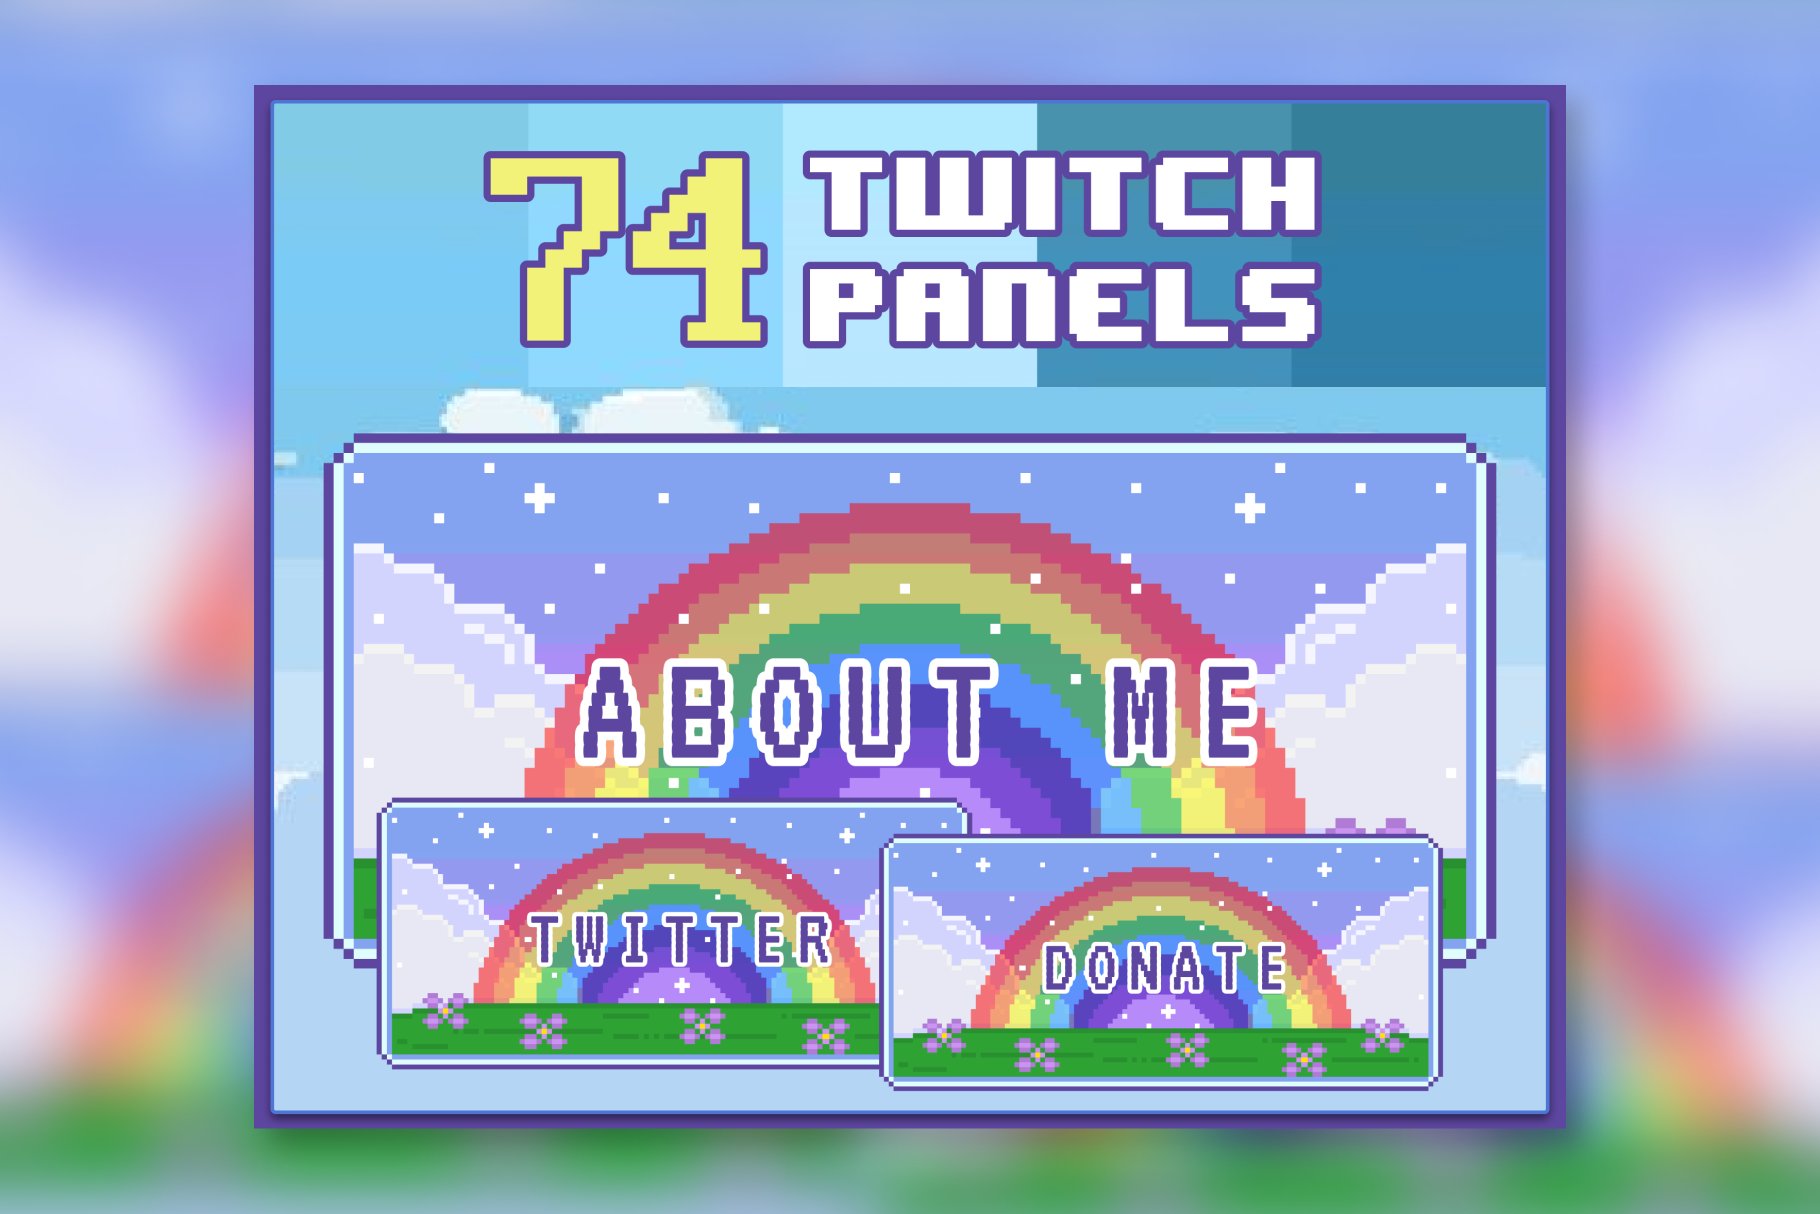 74x Rainbow Pixel Panels for Twitch cover image.